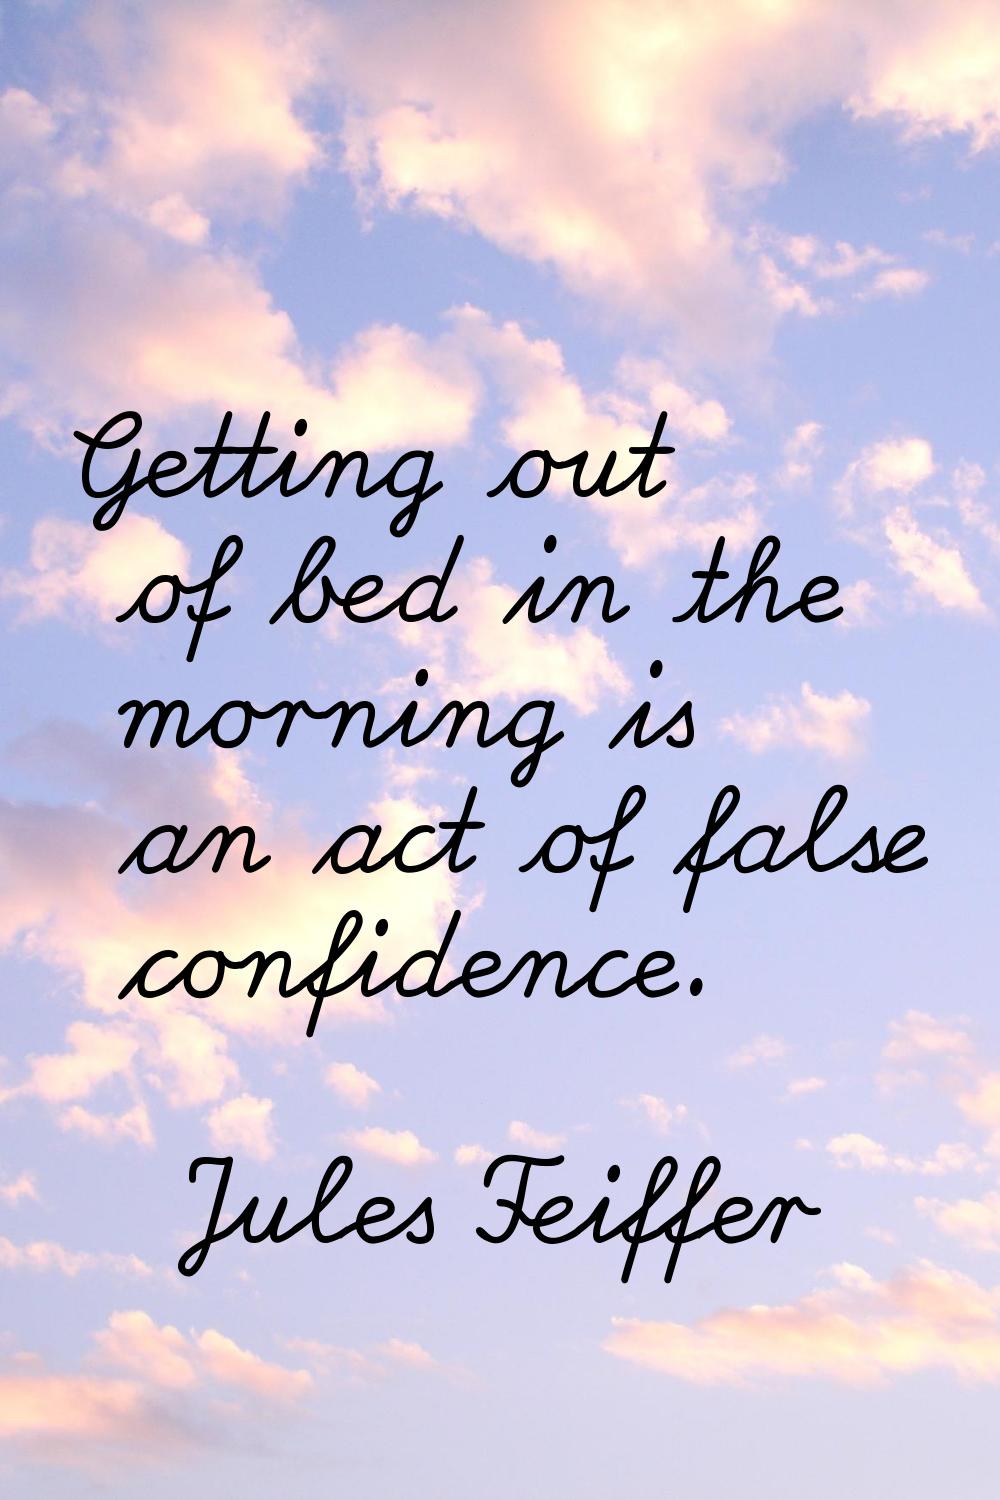 Getting out of bed in the morning is an act of false confidence.